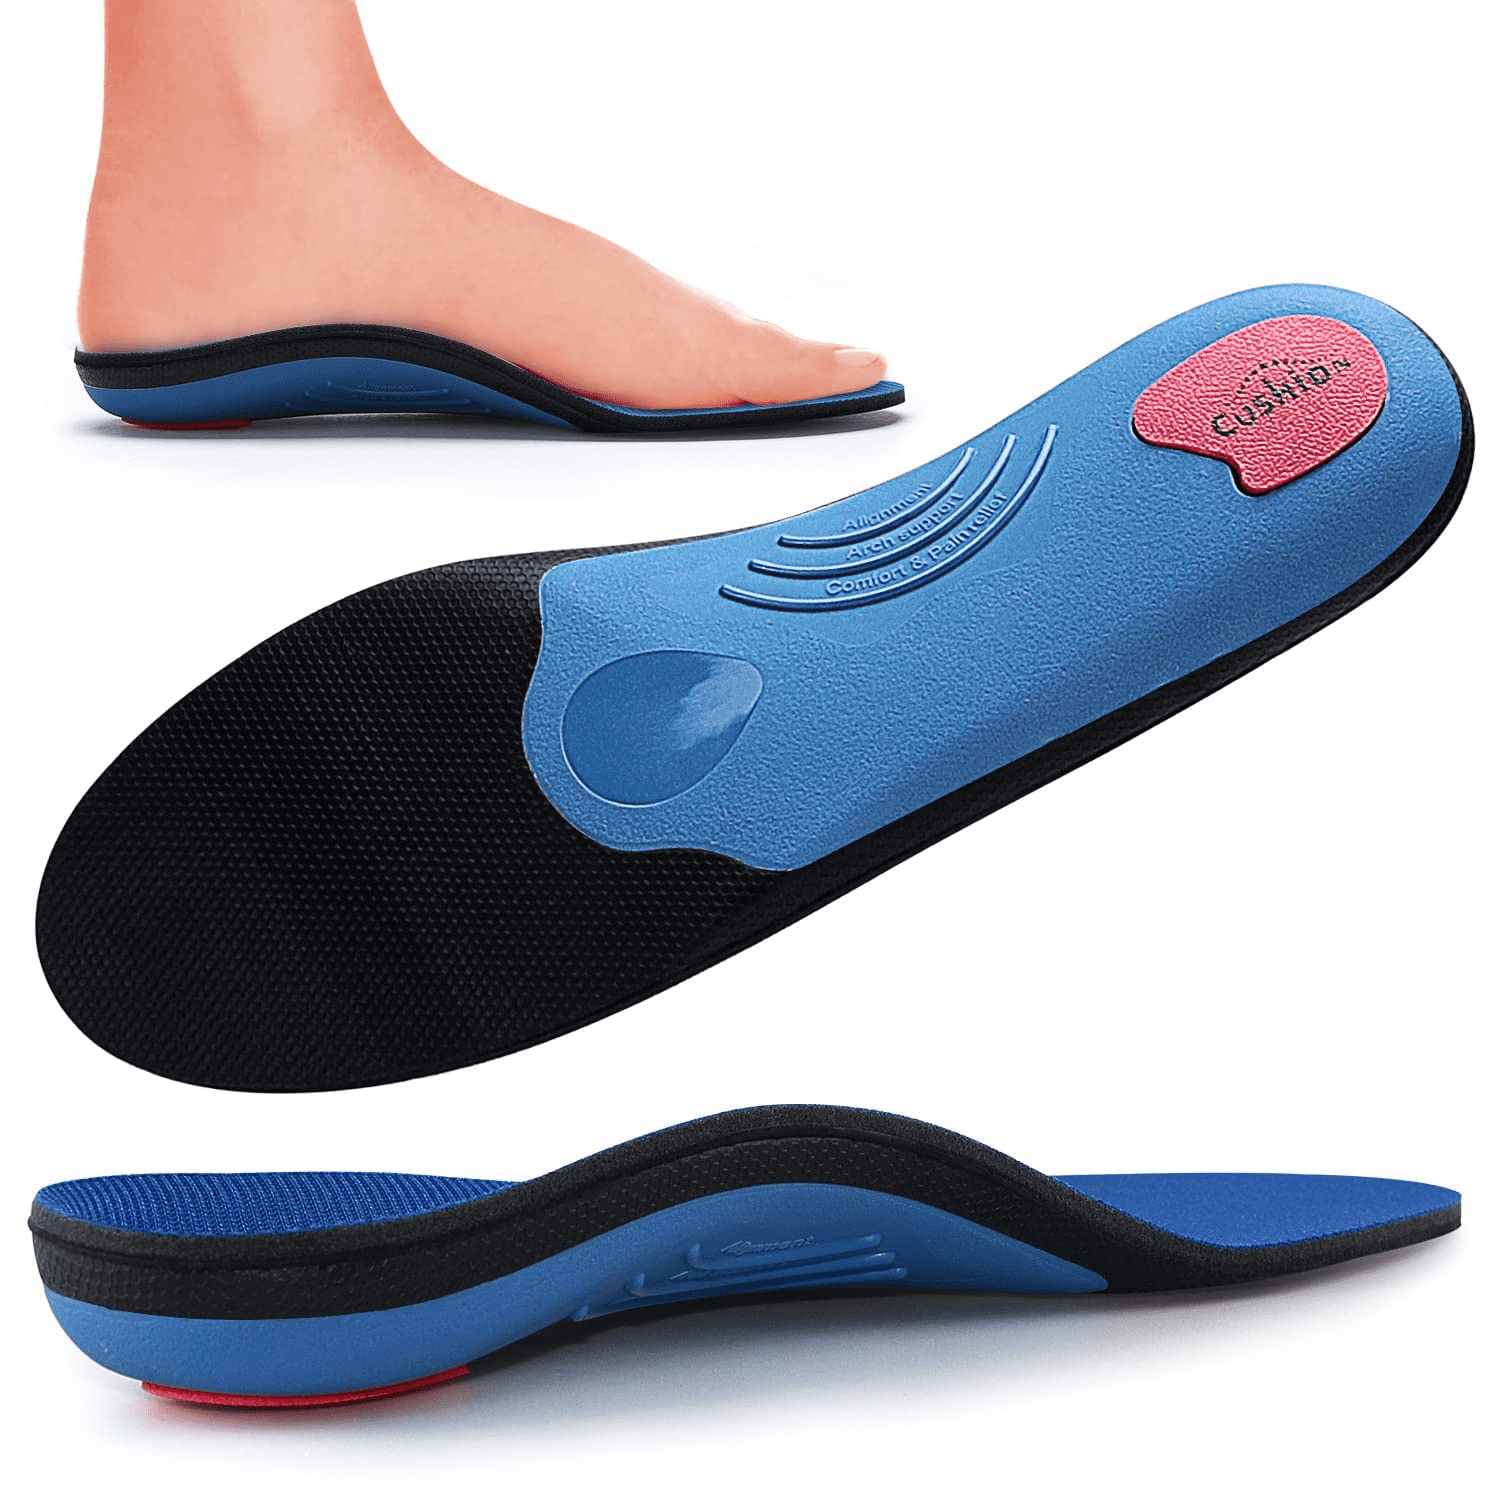 PCSsole Orthotic Arch Support Shoe Inserts Insoles for Flat Feet,Feet Pain,Plantar Fasciitis,Insoles For Men and Women 